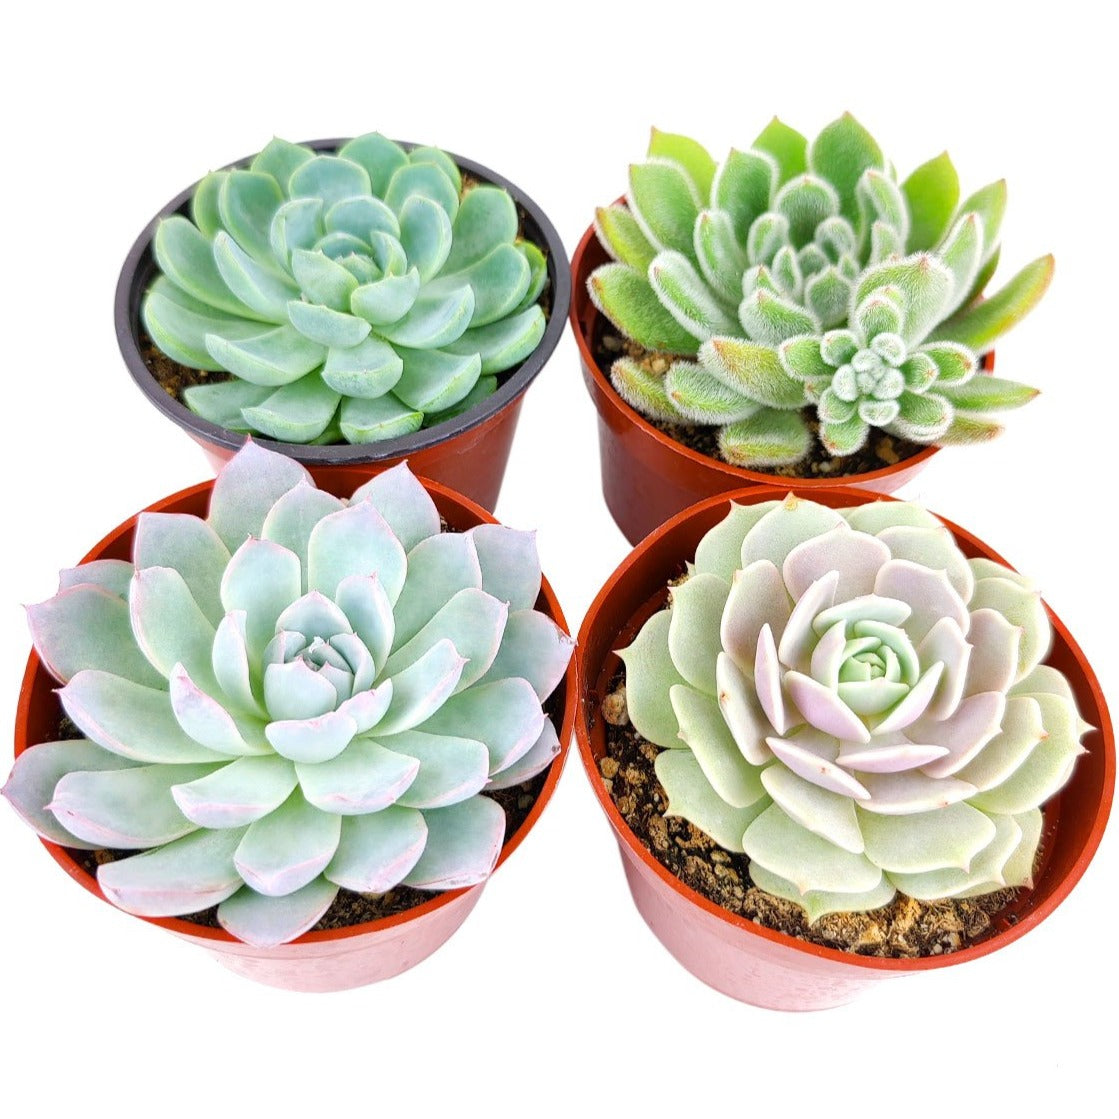 Succulents for Holiday, Holiday Succulent Pack, Indoor Holiday Succulents, Succulents for Holiday for Sale, Succulents for Holiday 2022, Holiday Succulent Gift Ideas, Succulent for Holiday Decorations, Succulent for Holiday Ideas 2022